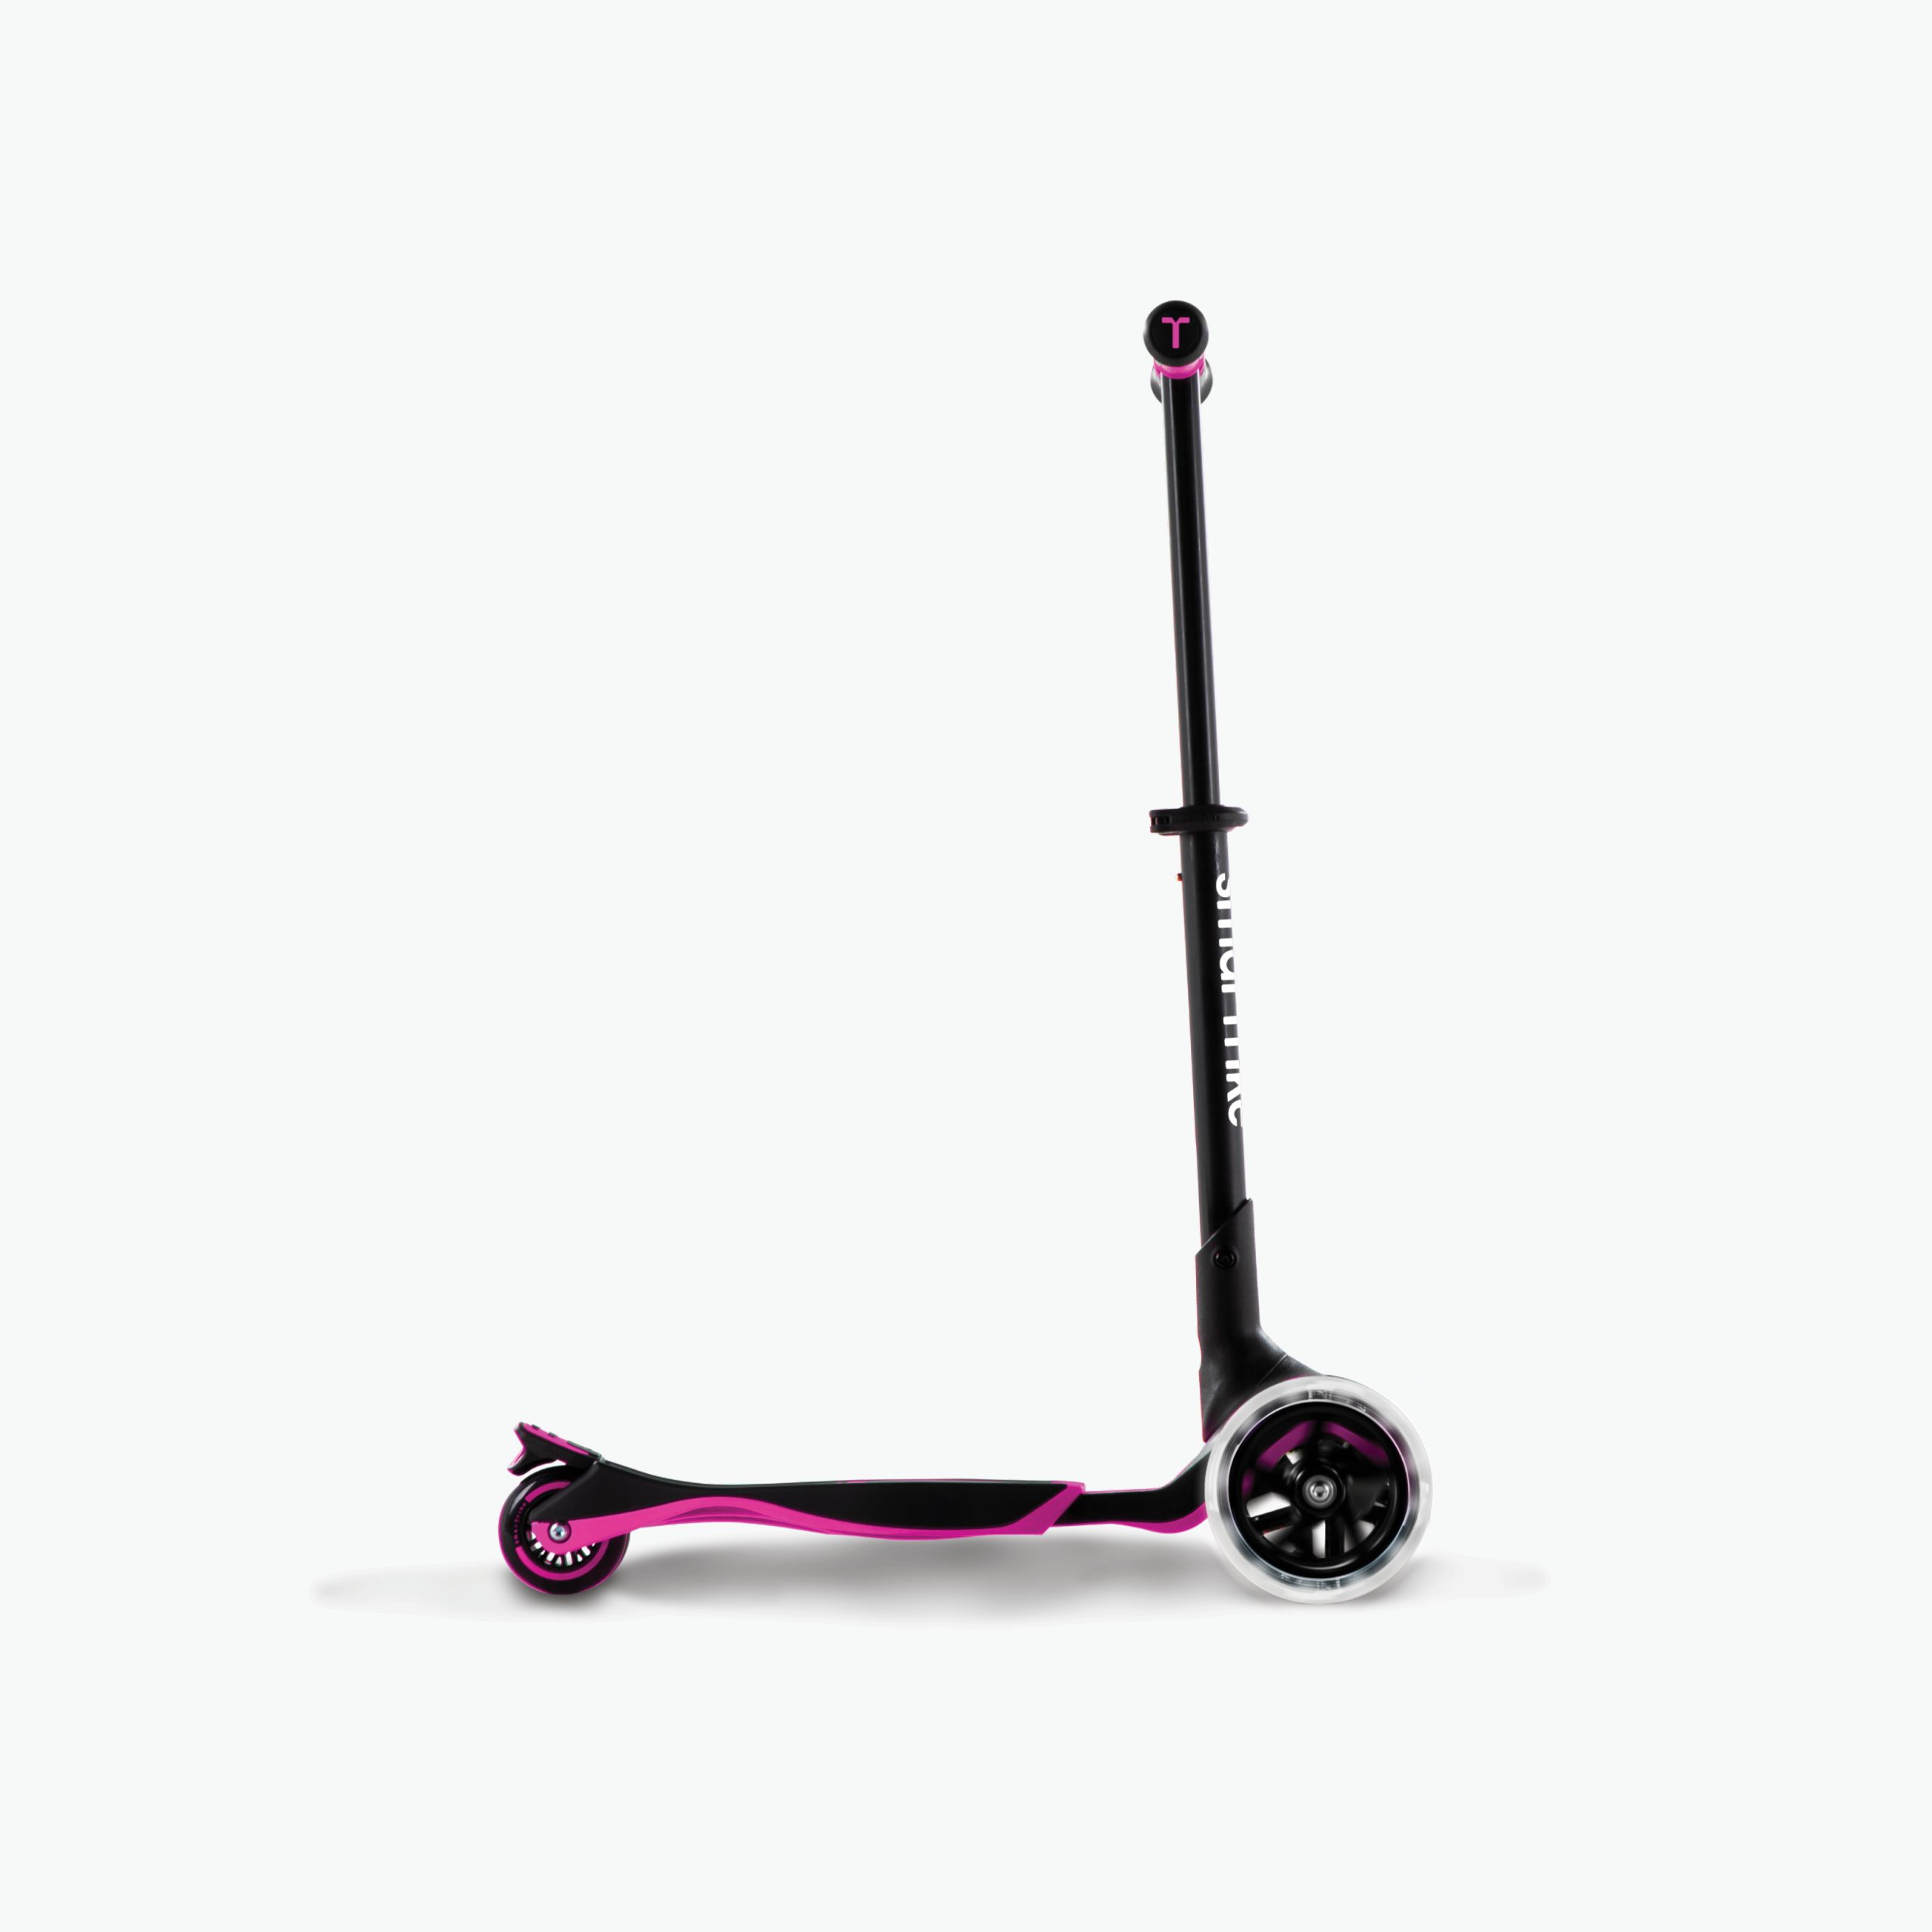 Xtend Scooter - Pink - side view of the scooter.